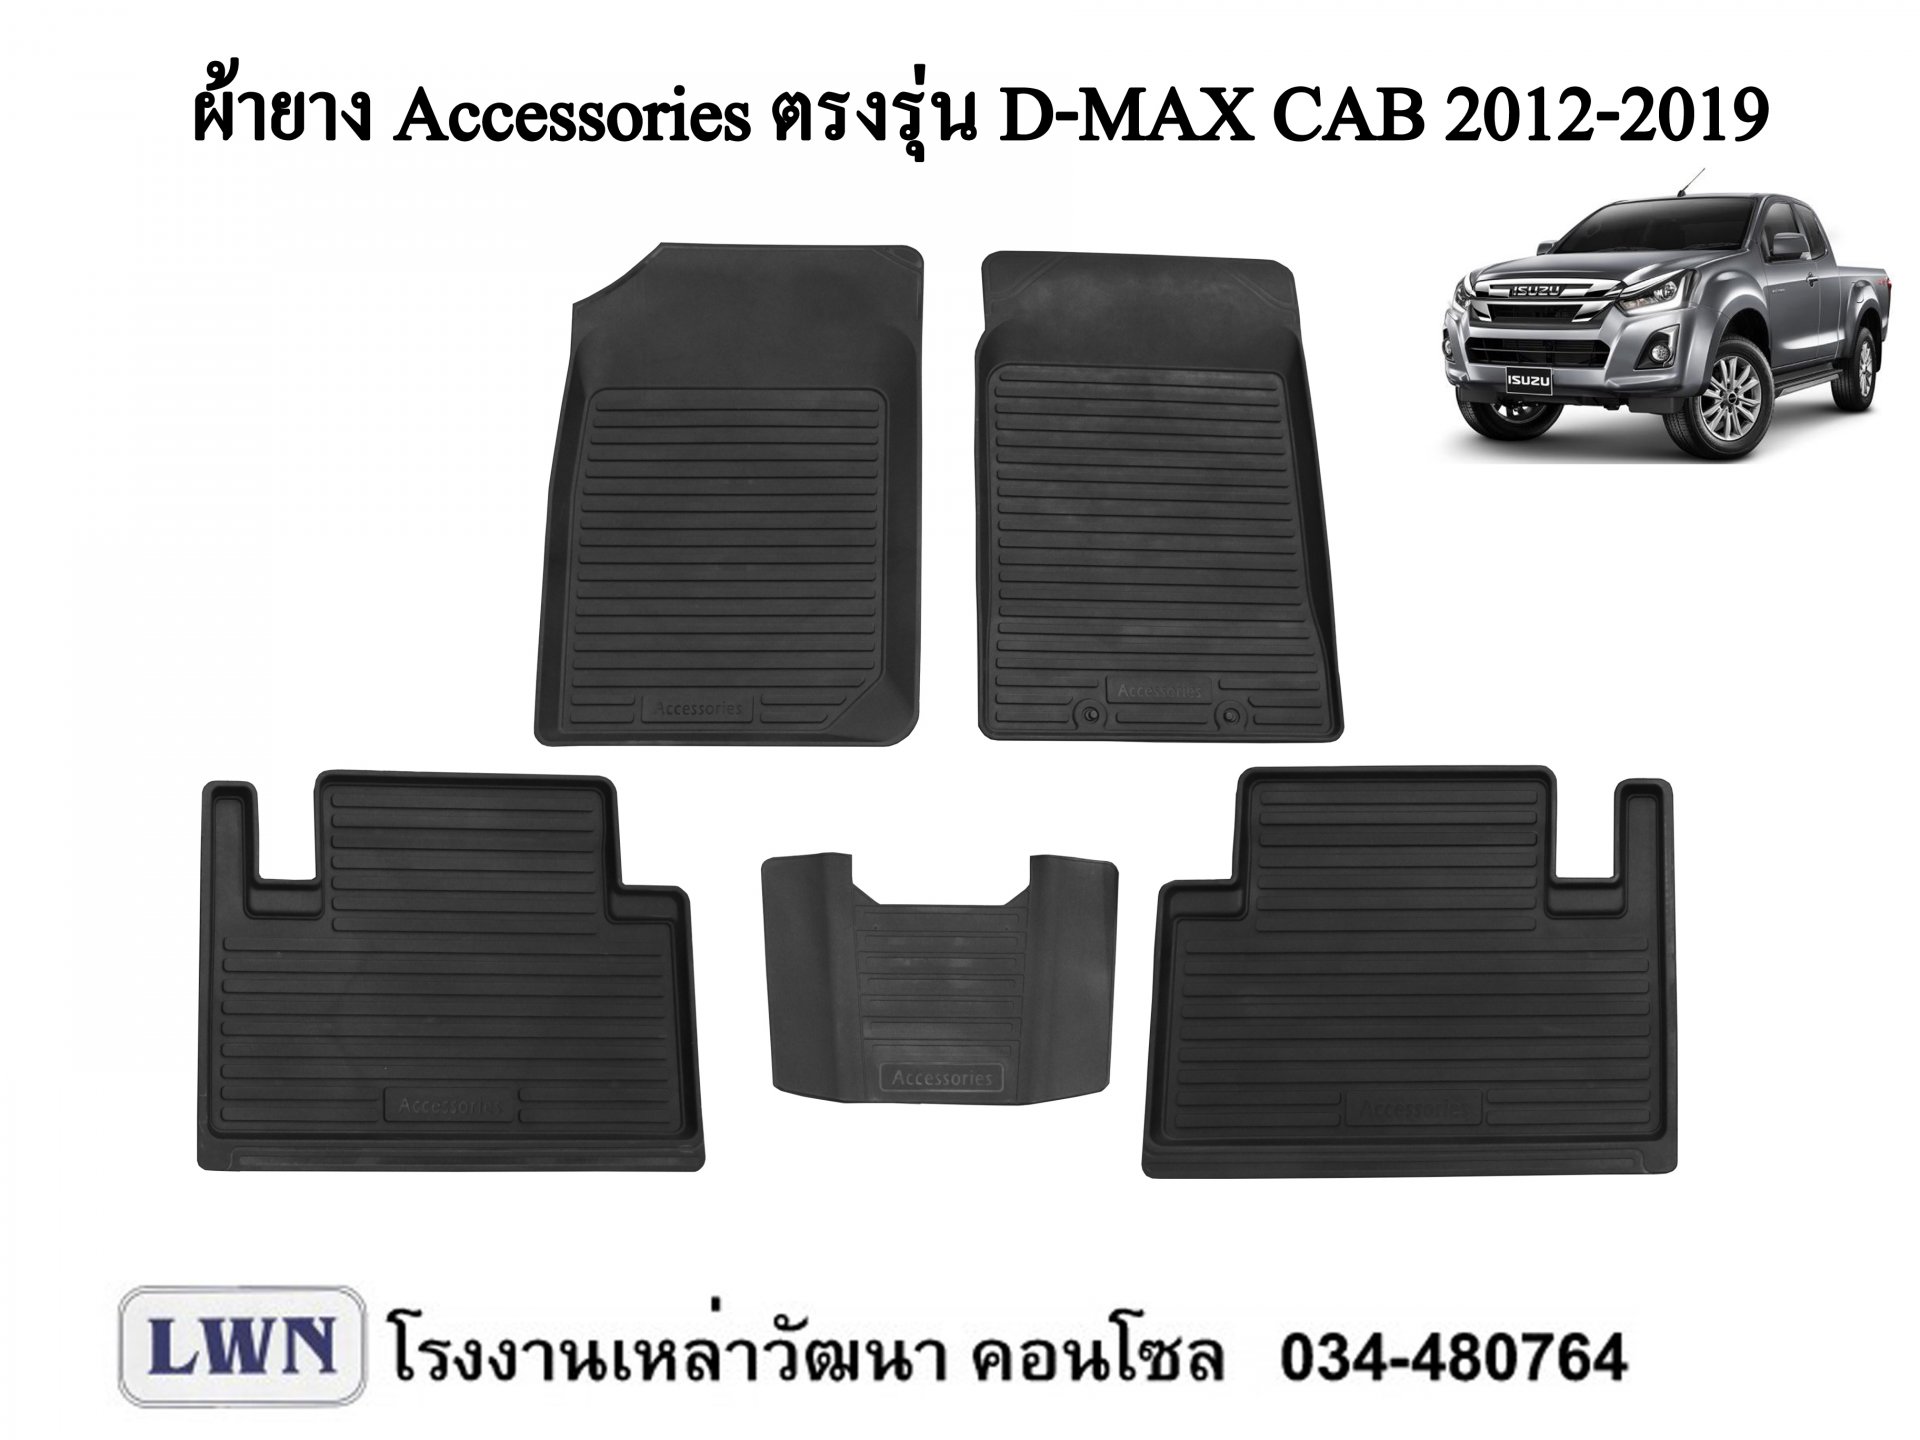 ACC-All New D-max Single Cab